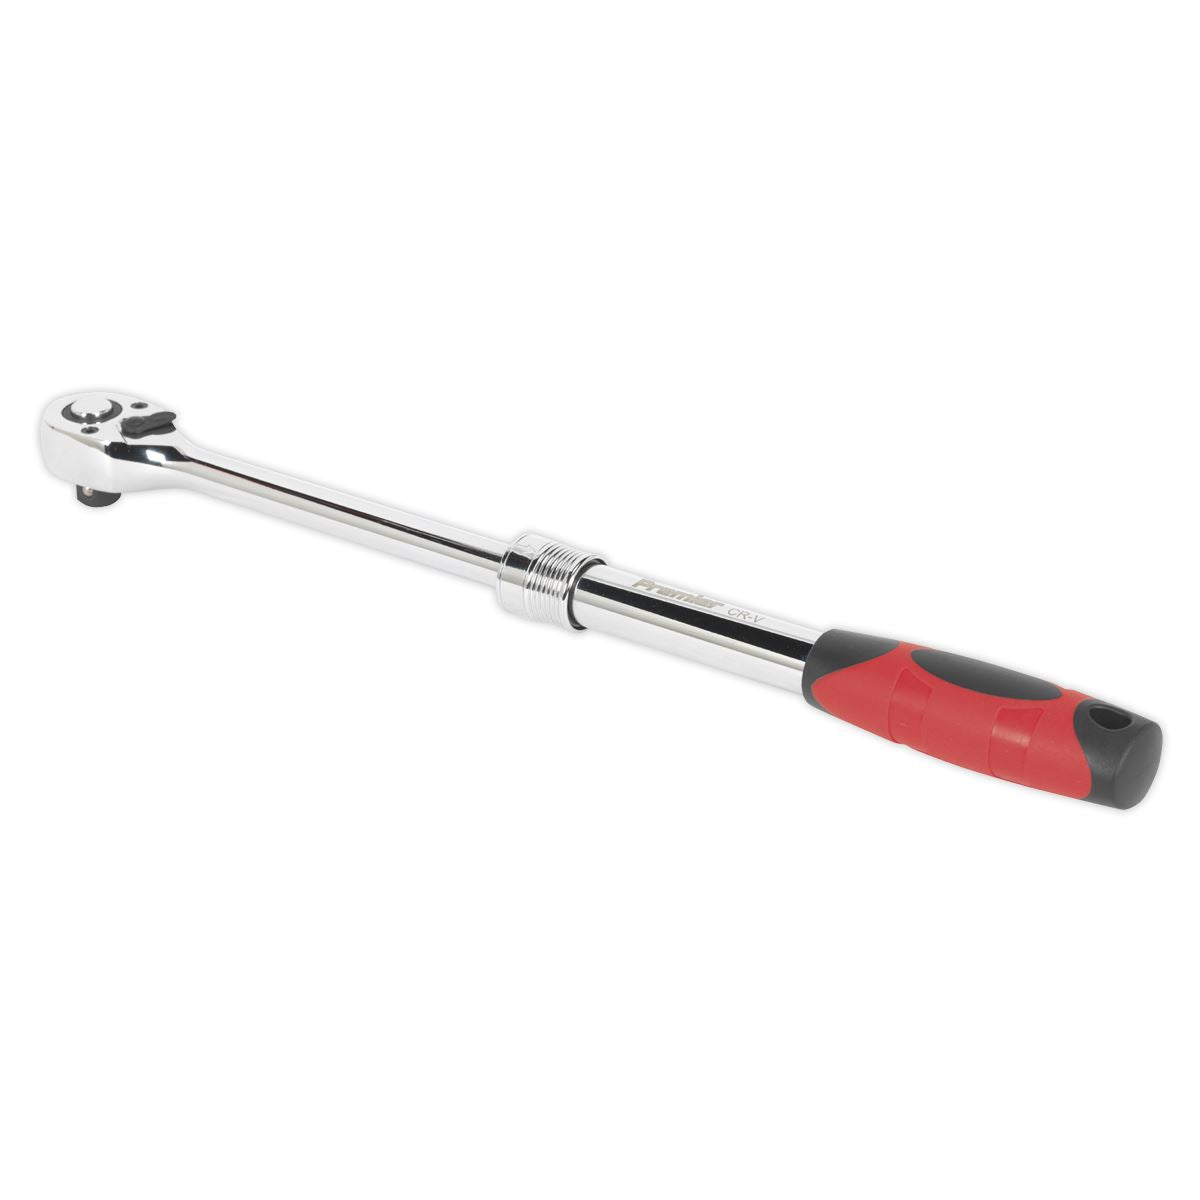 Sealey Premier Ratchet Wrench 1/2"Sq Drive Extendable